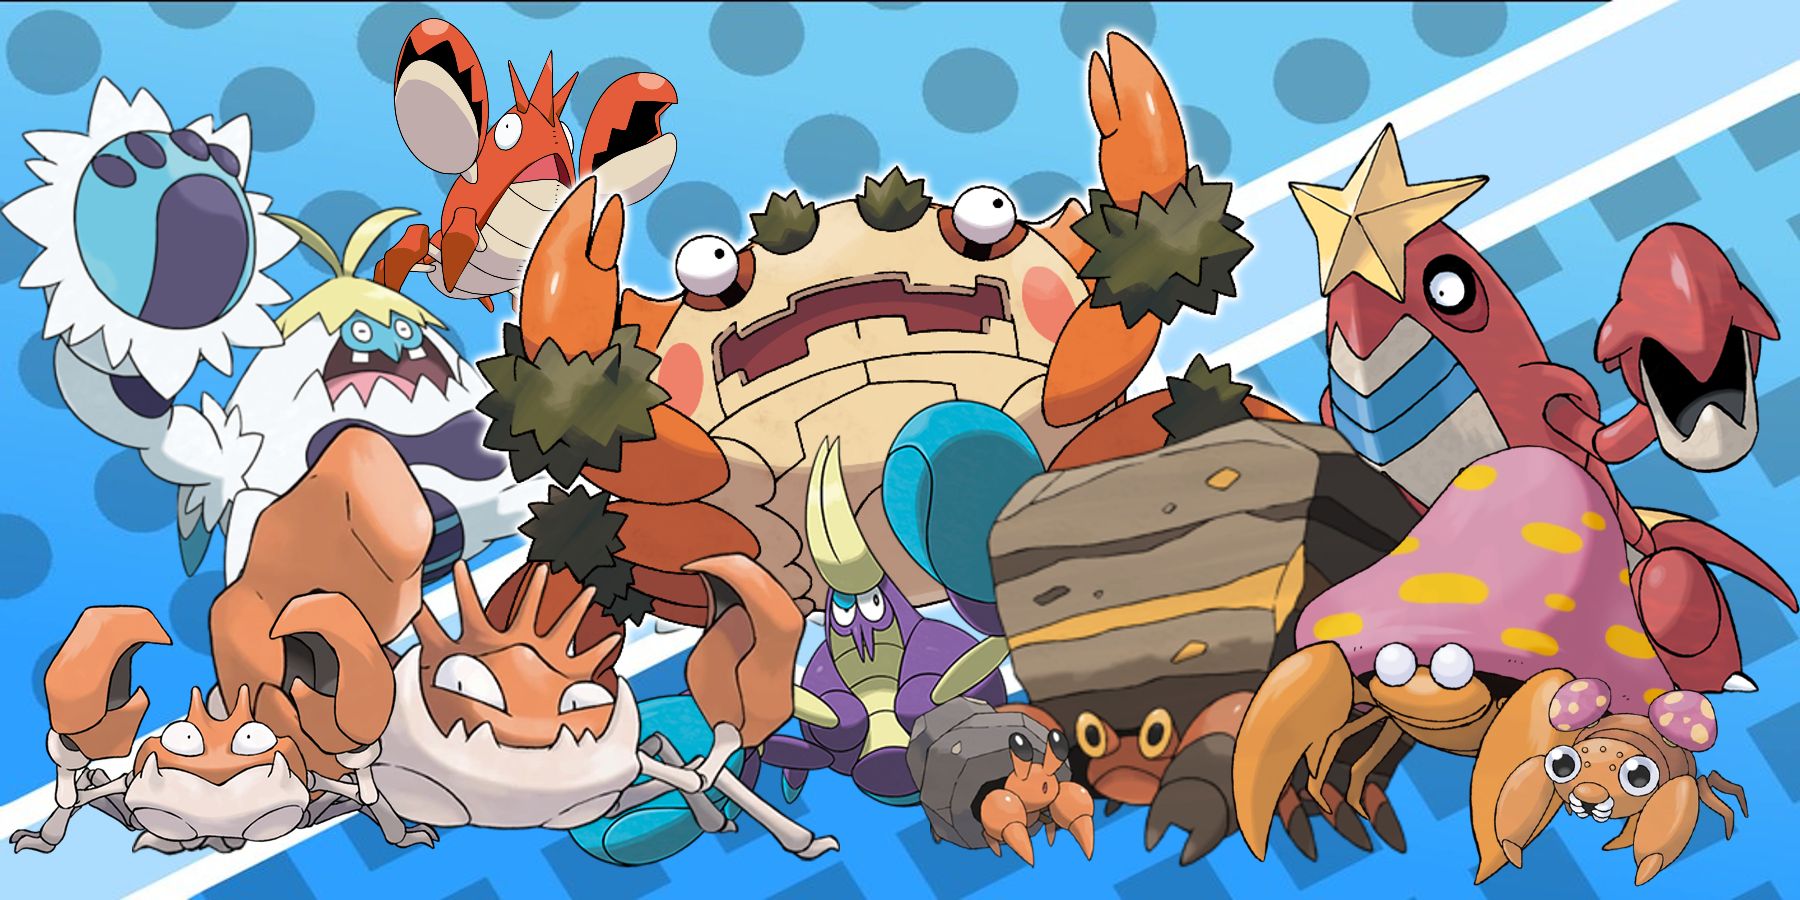 A selection of crab and lobster Pokemon as examples of carcinization, including Krabby and Kingler, Paras and parasect, Corphish and Crawdaunt, Dwebble and Crustle, Crabrawler and Crabominable, and Klawf.